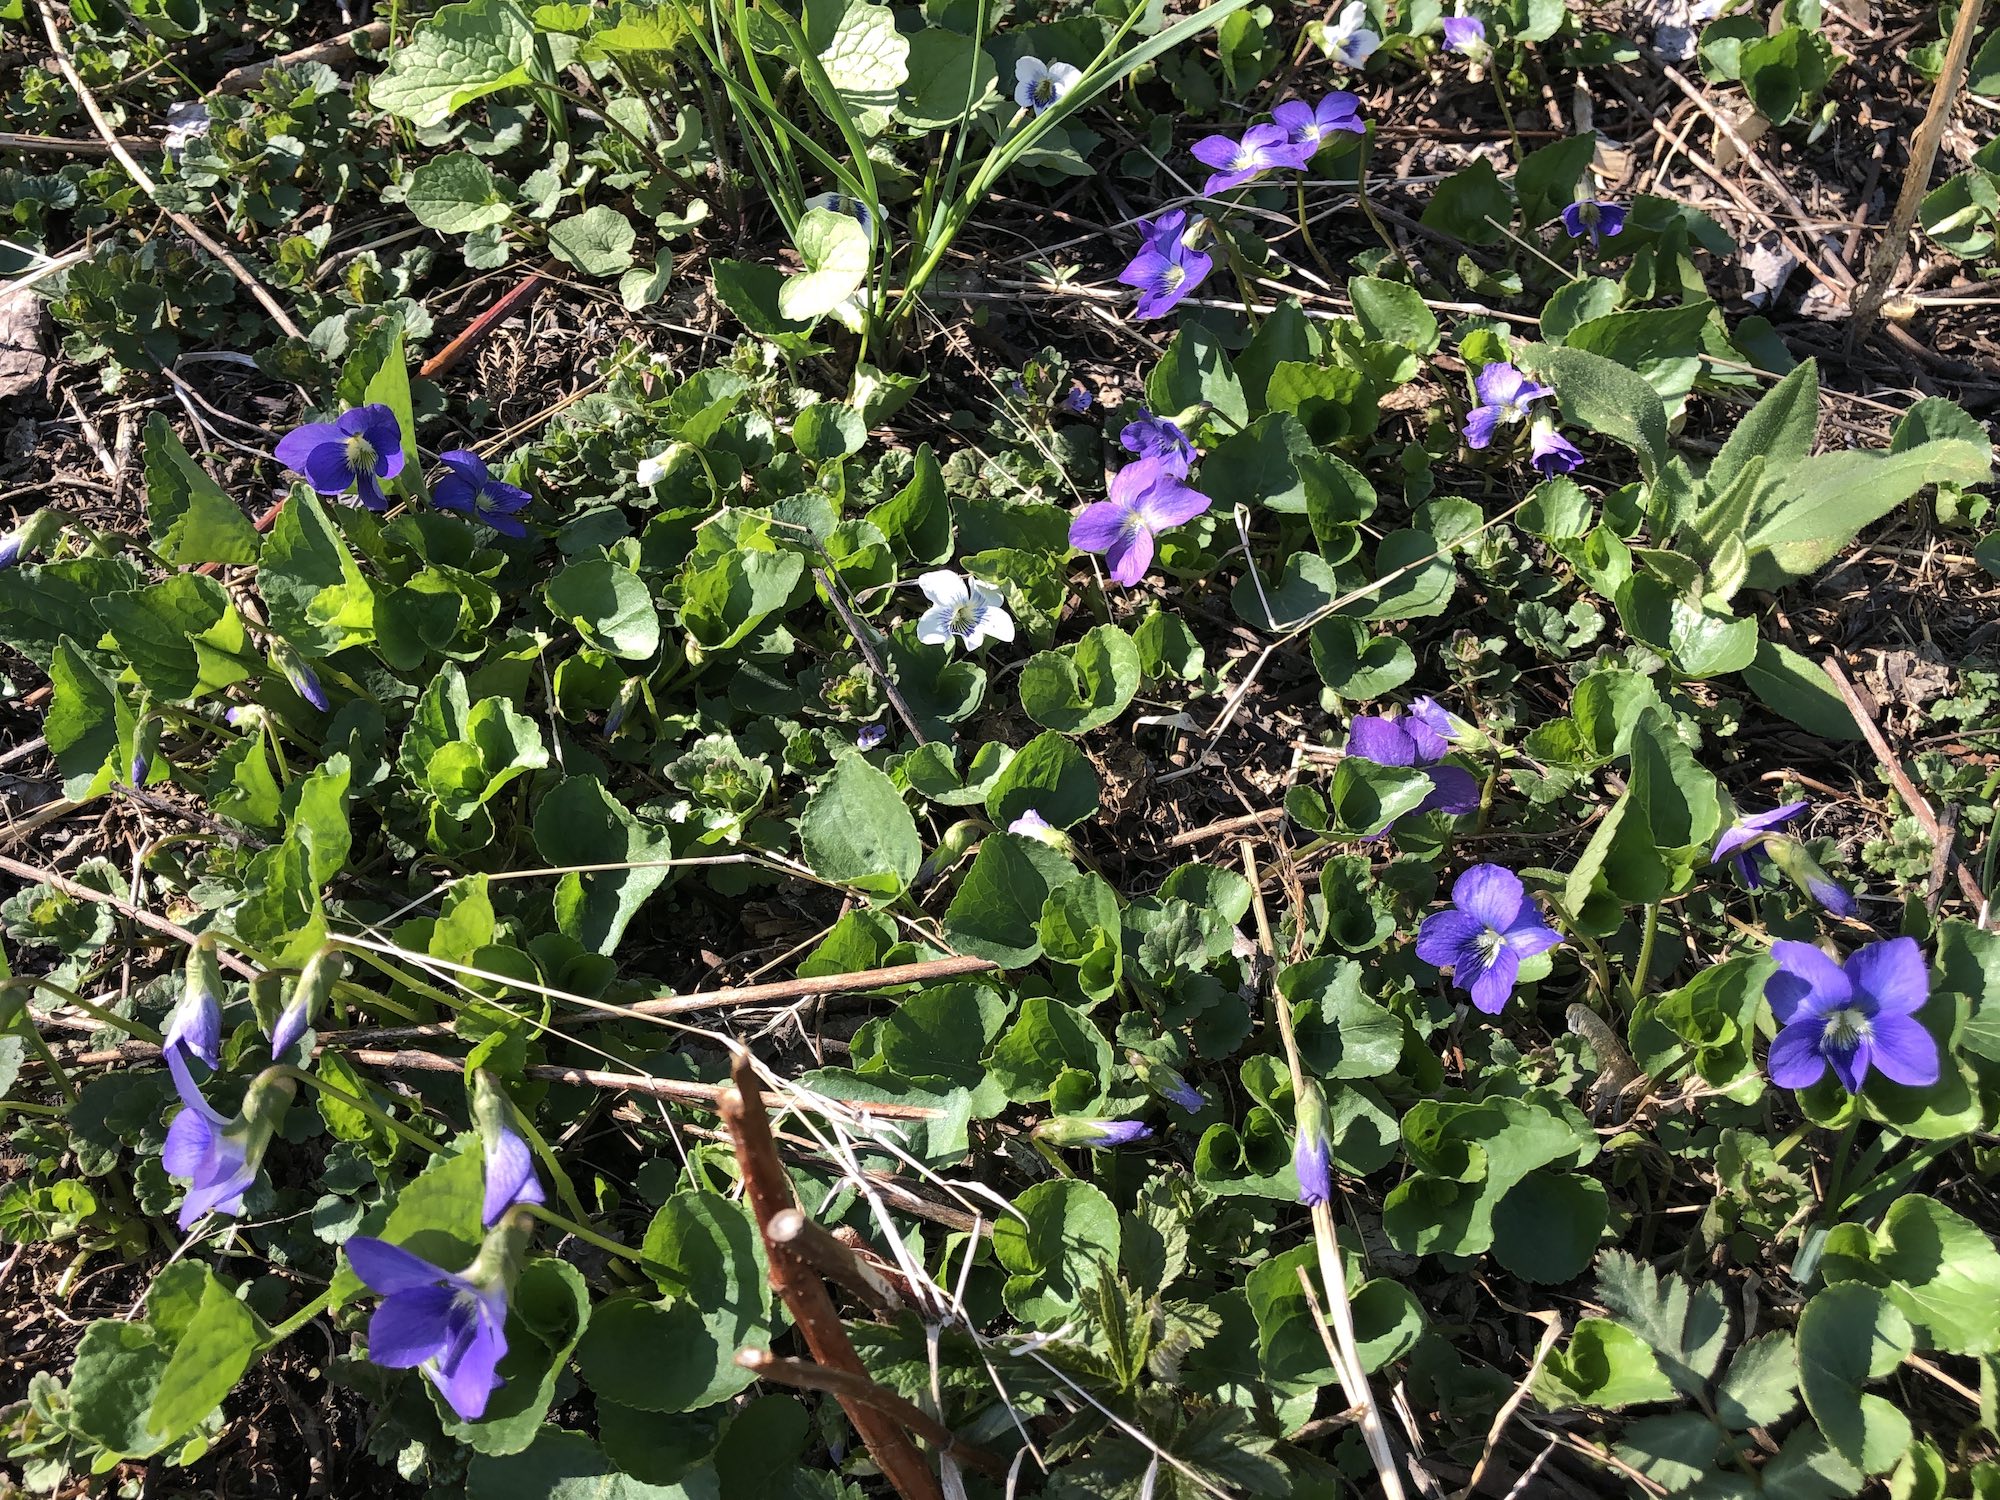 Wood Violets near Council Ring, the Oak Savanna and the Duck Pond on April 21, 2019.